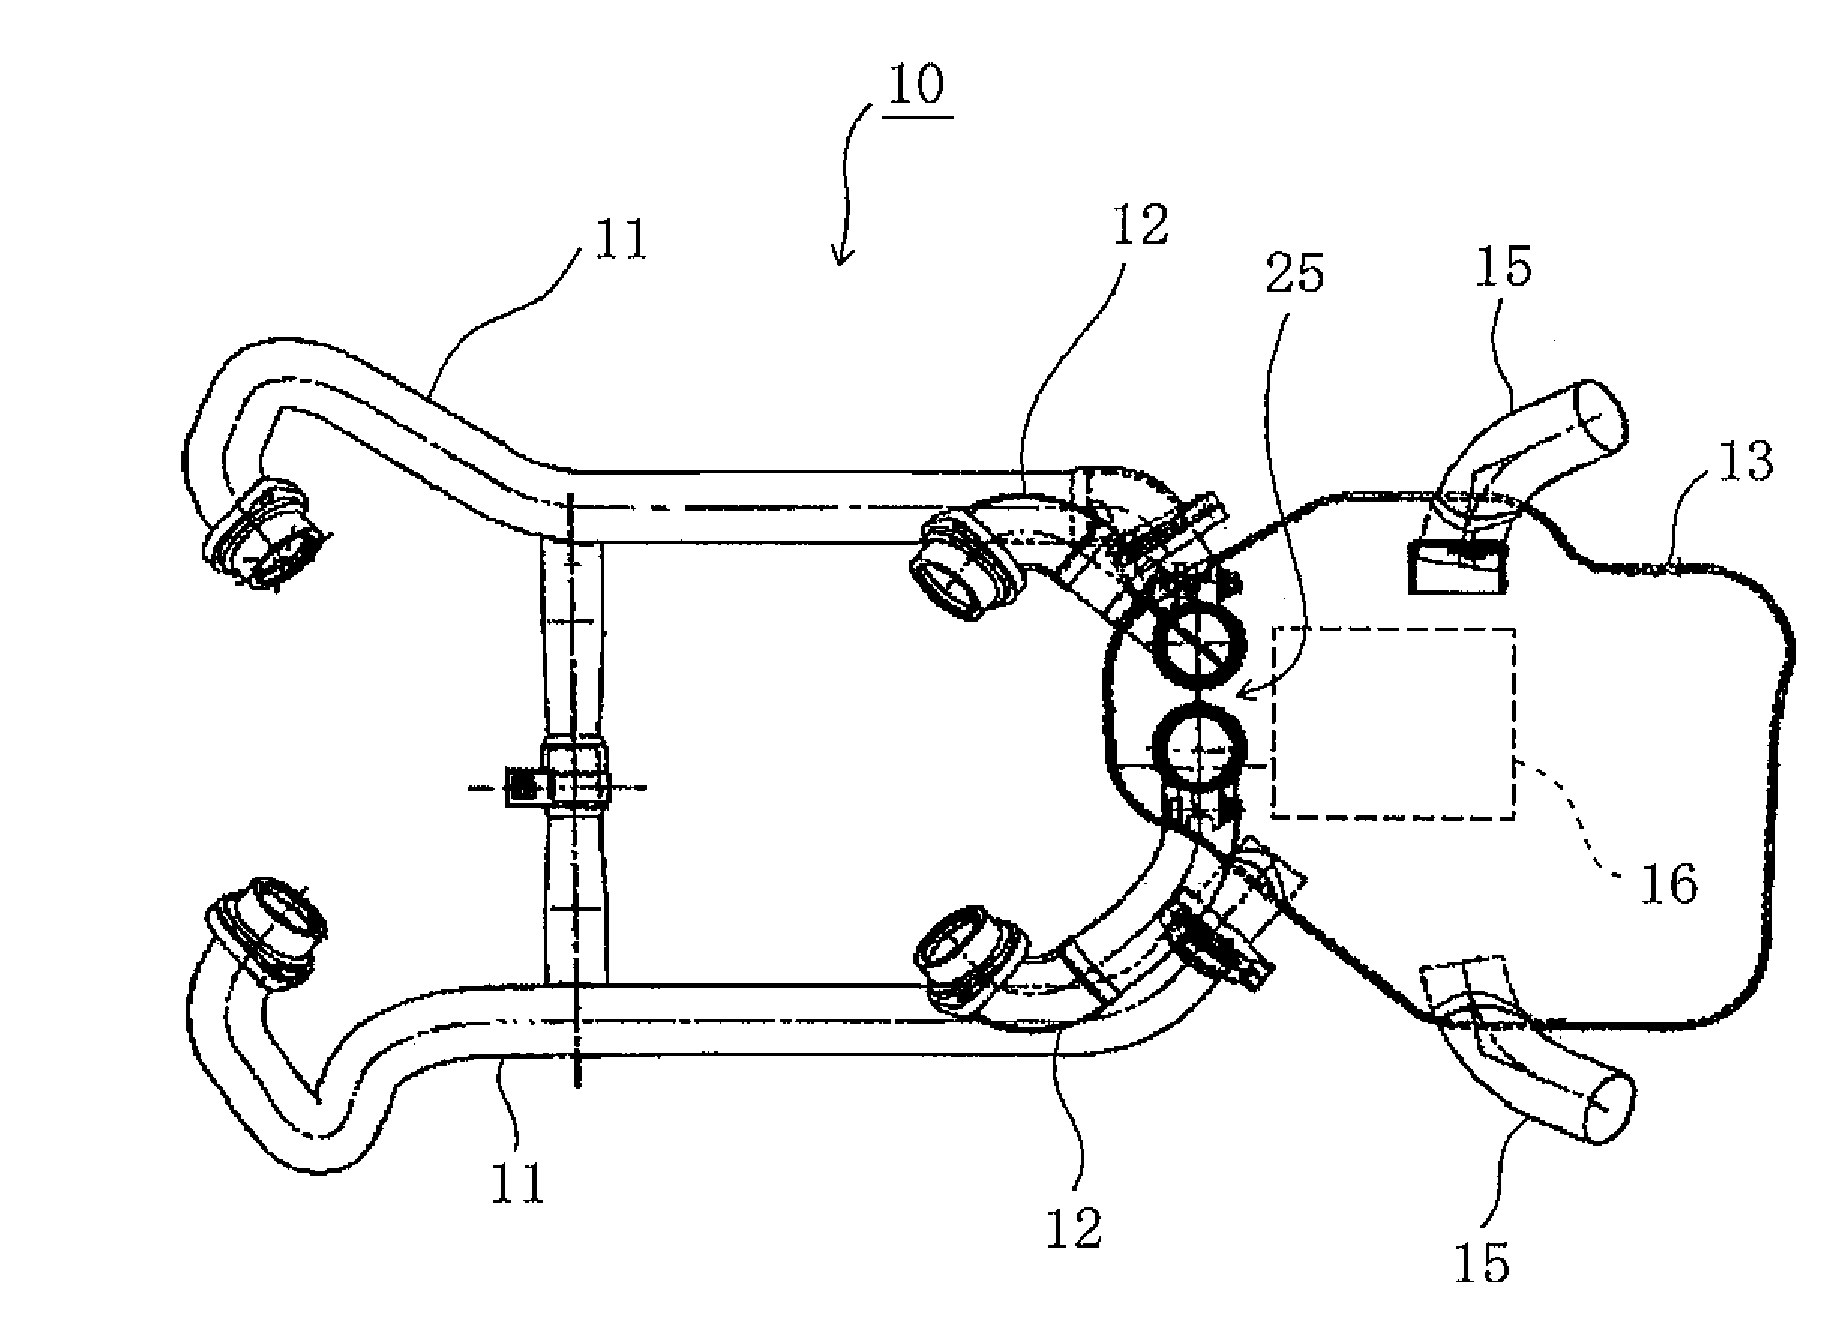 Exhaust system of motorcycle and motorcycle including exhaust system